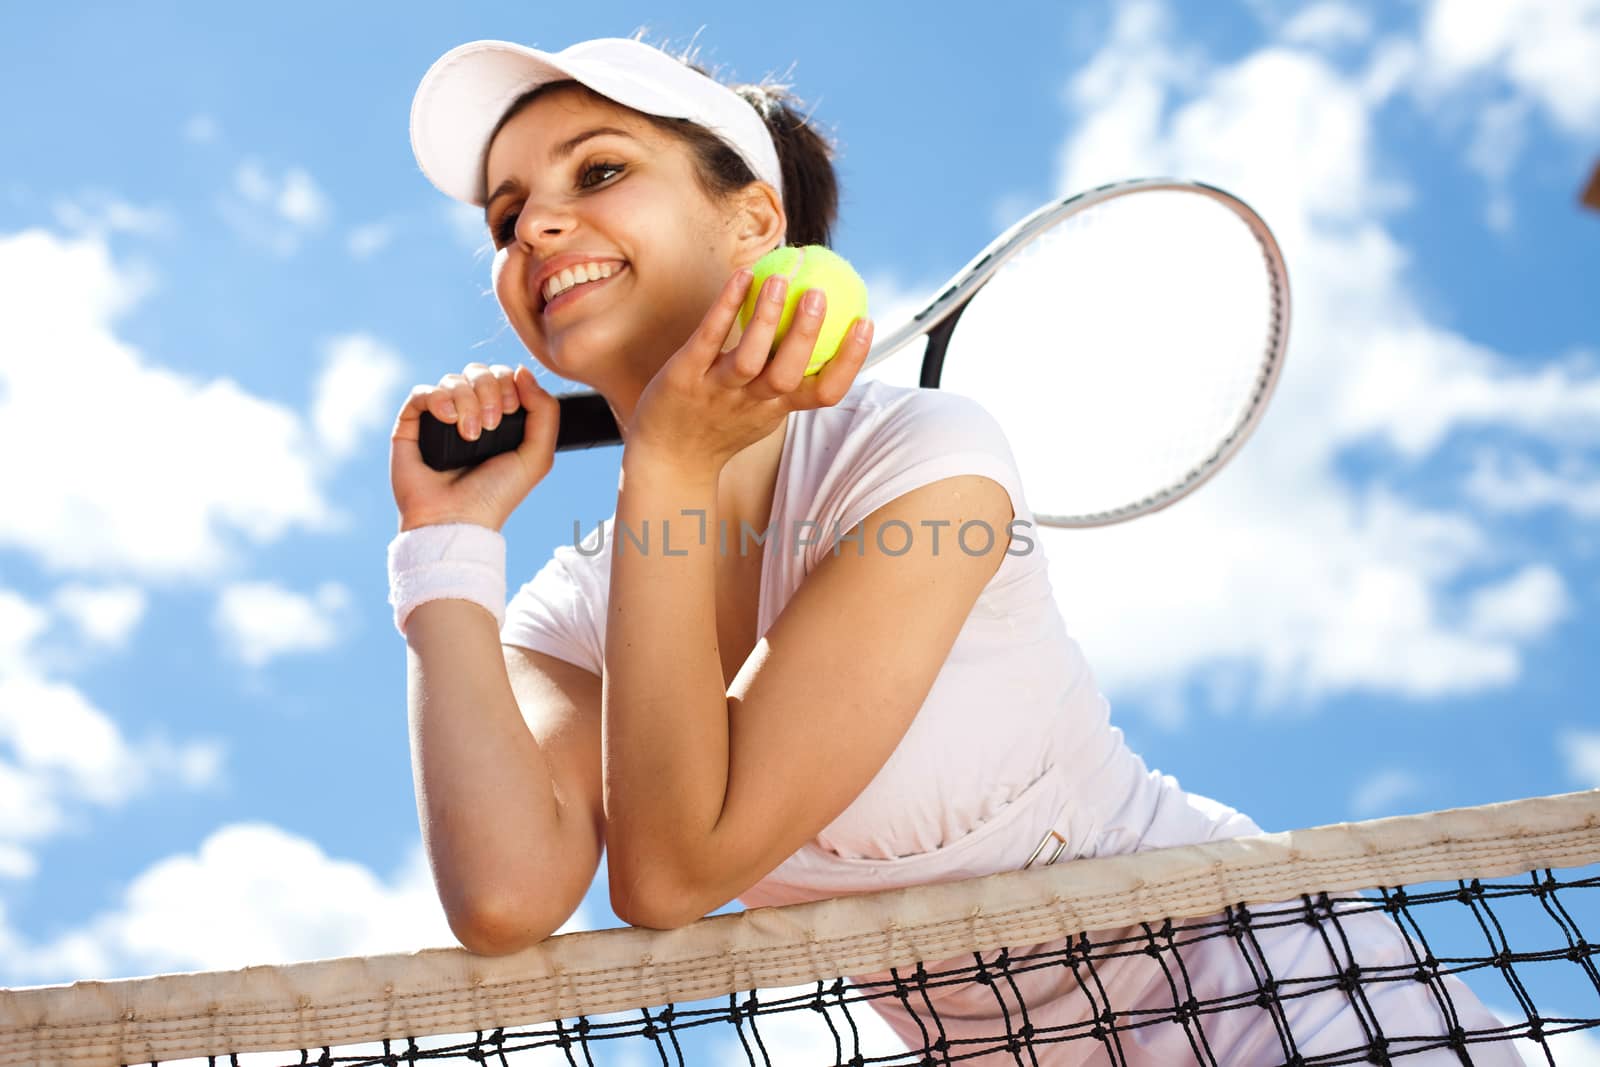 Woman playing tennis in summer by JanPietruszka